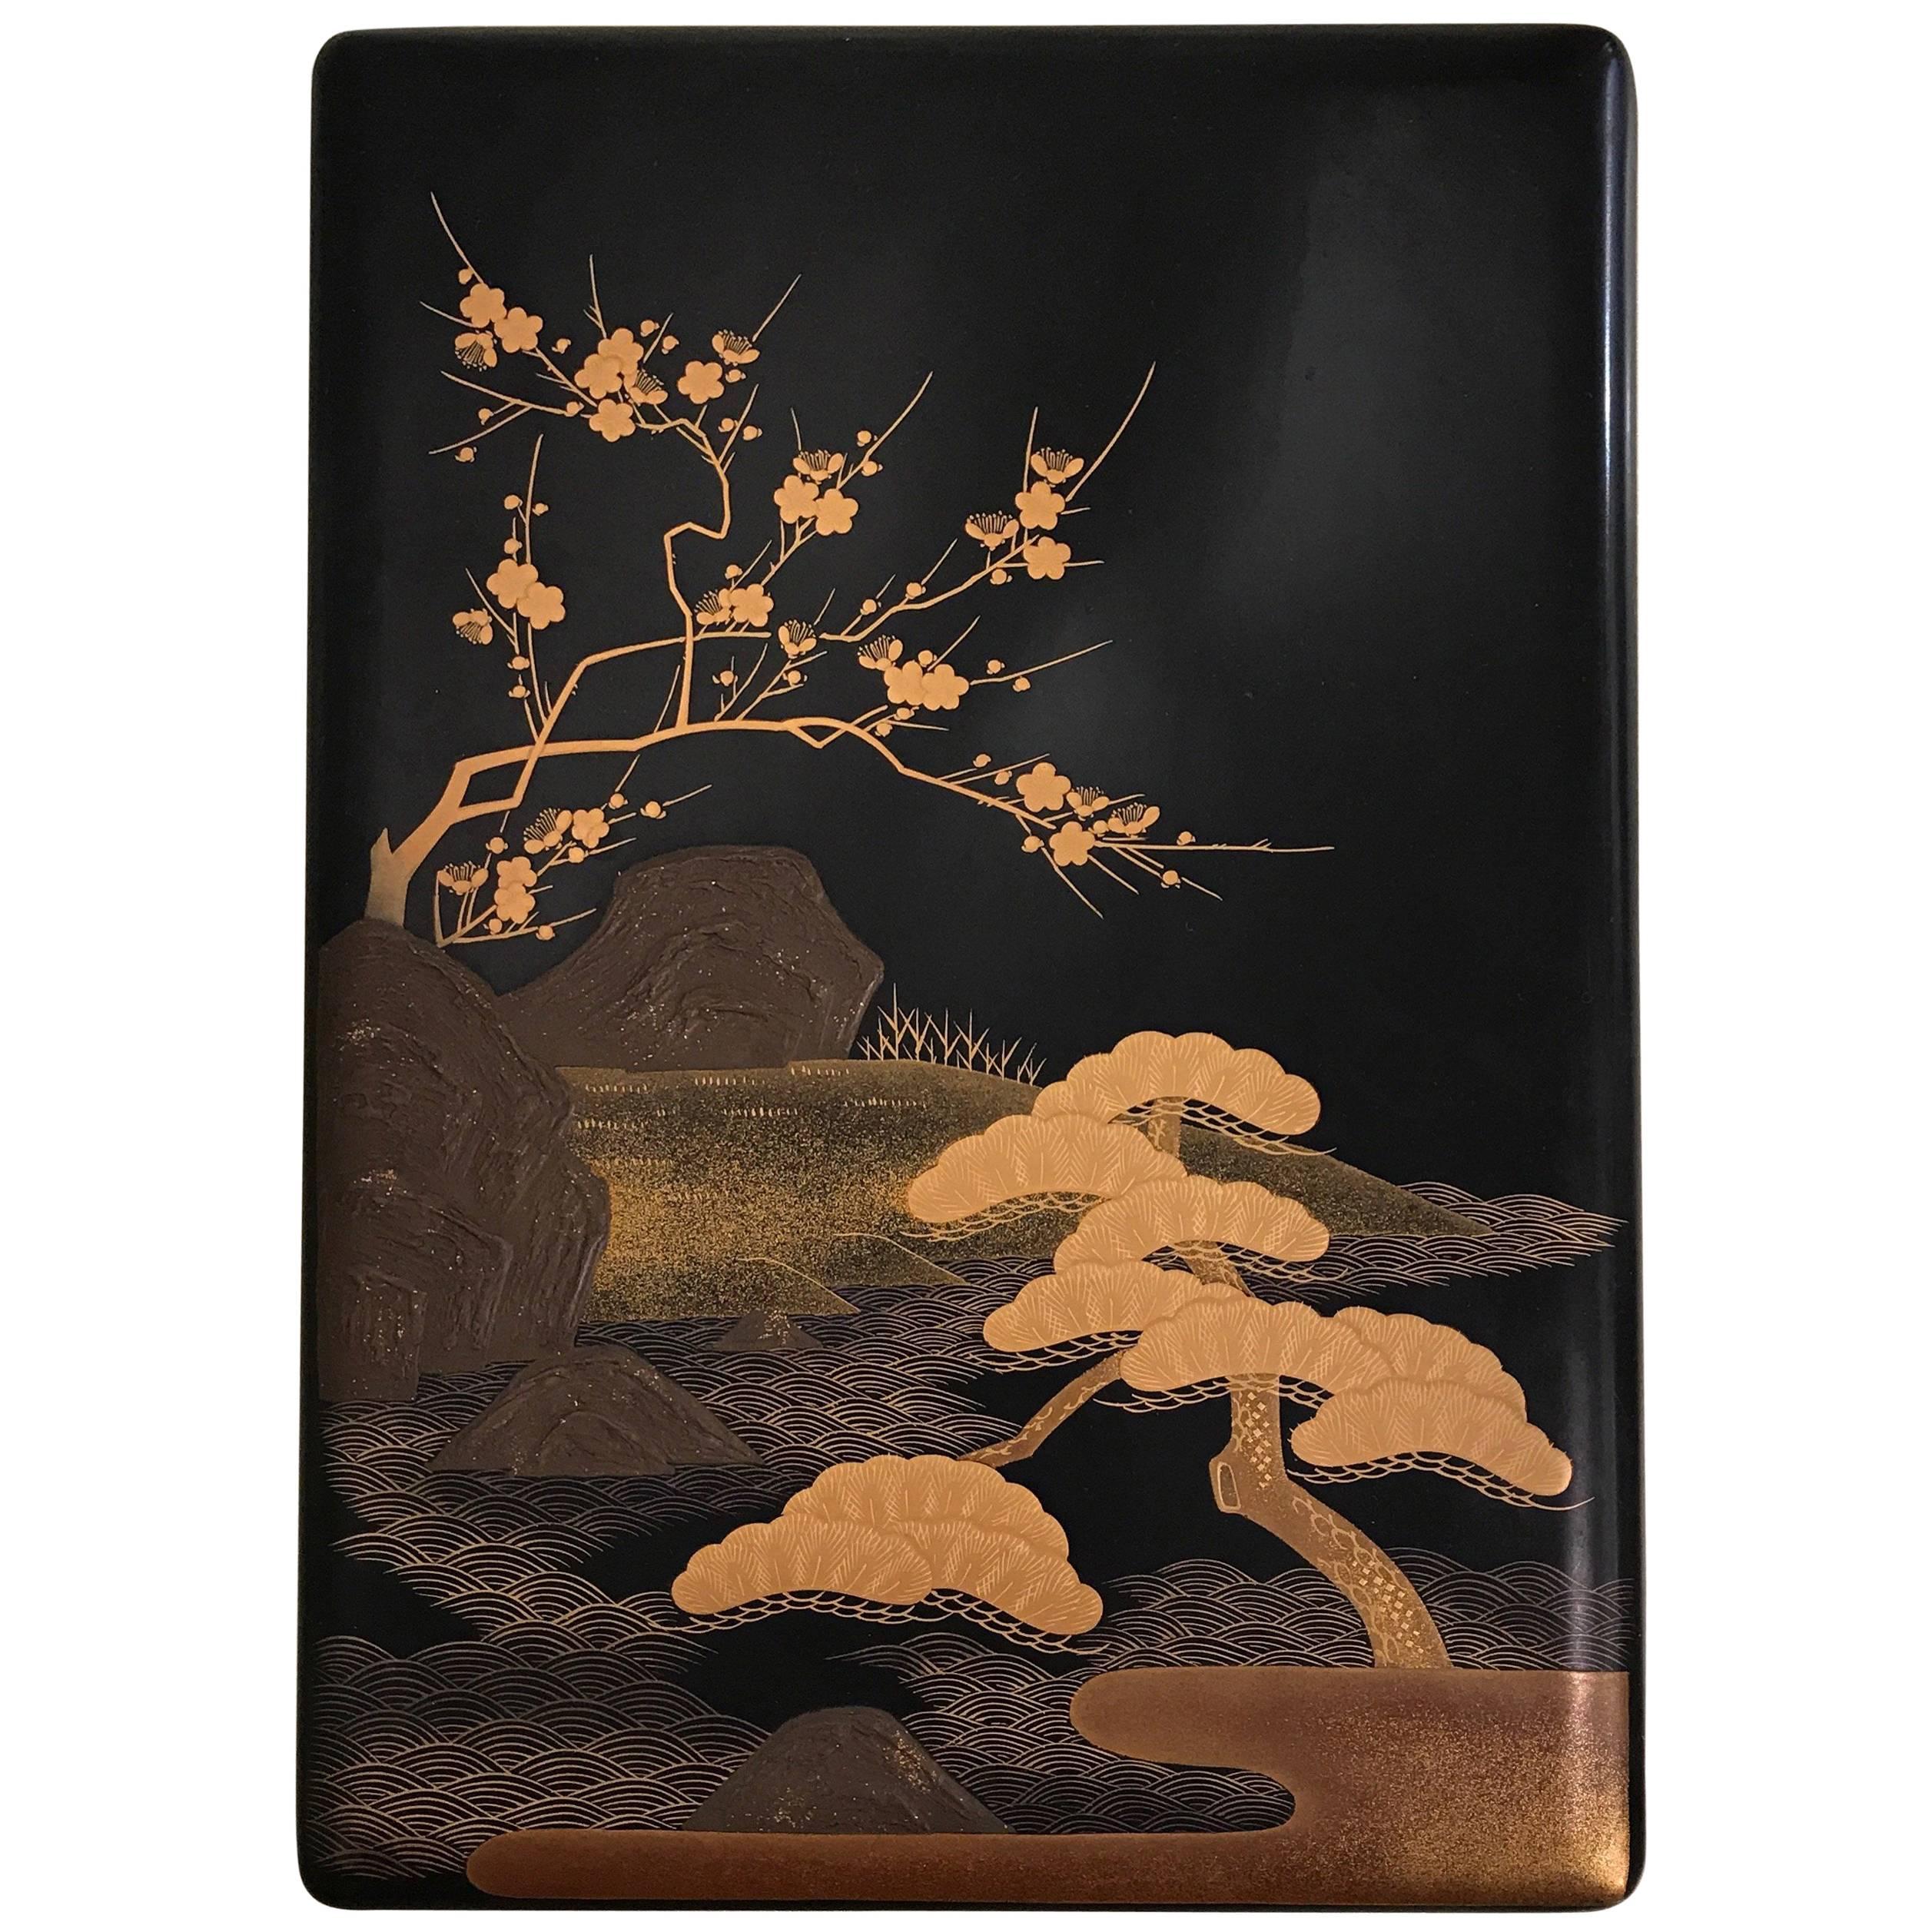 Japanese Lacquer Box with Gold Pine Trees